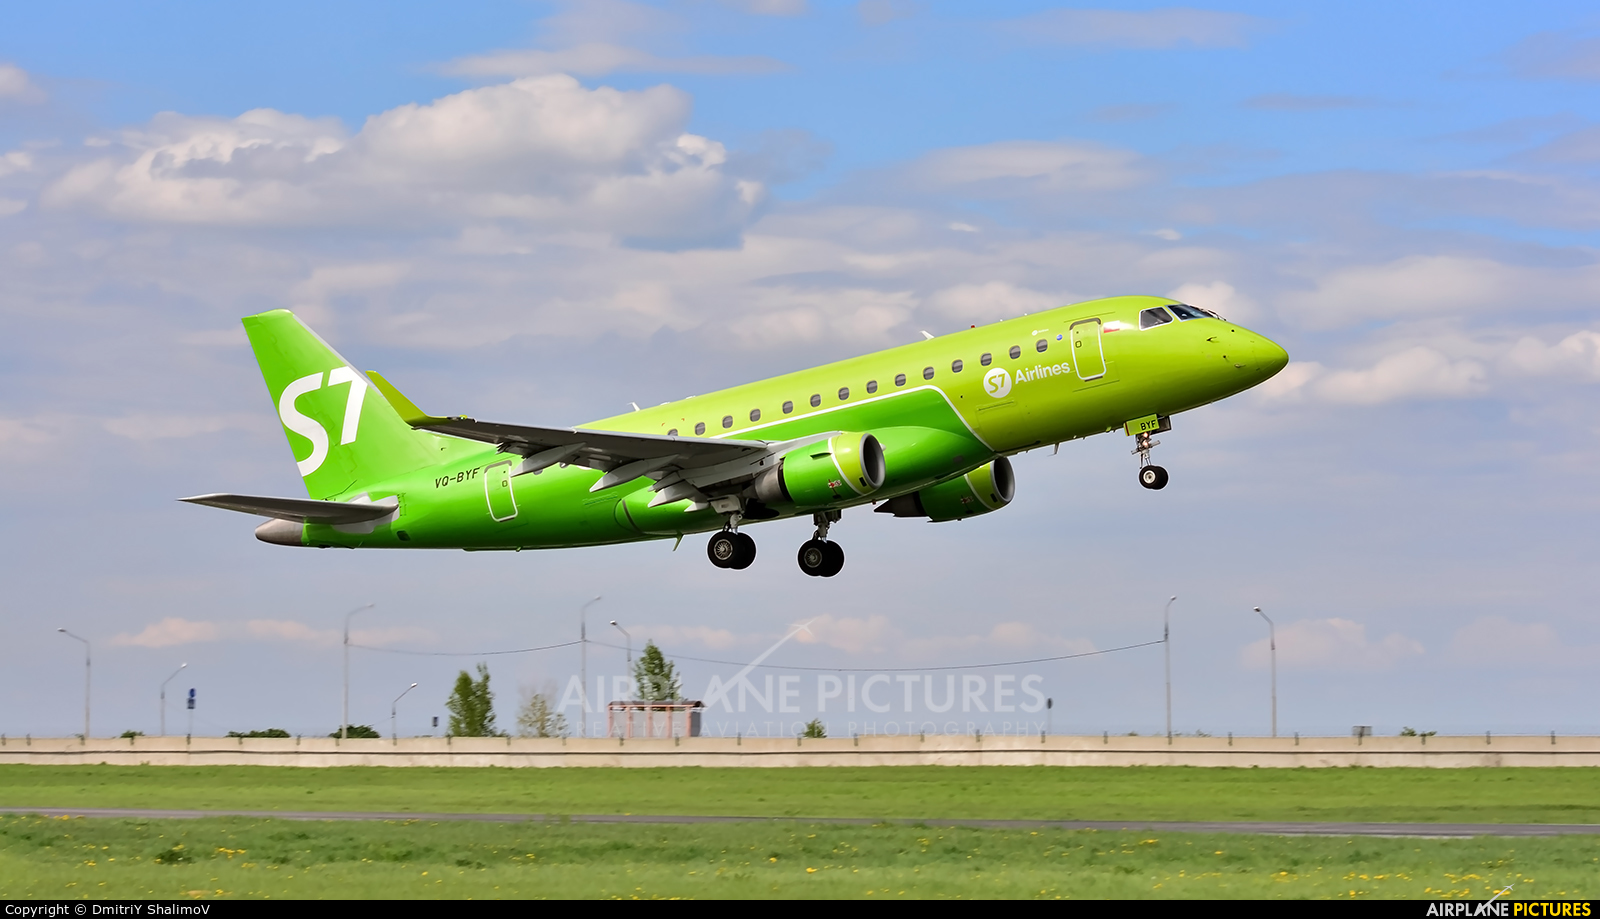 S7 Airlines VQ-BYF aircraft at Belgorod Intl